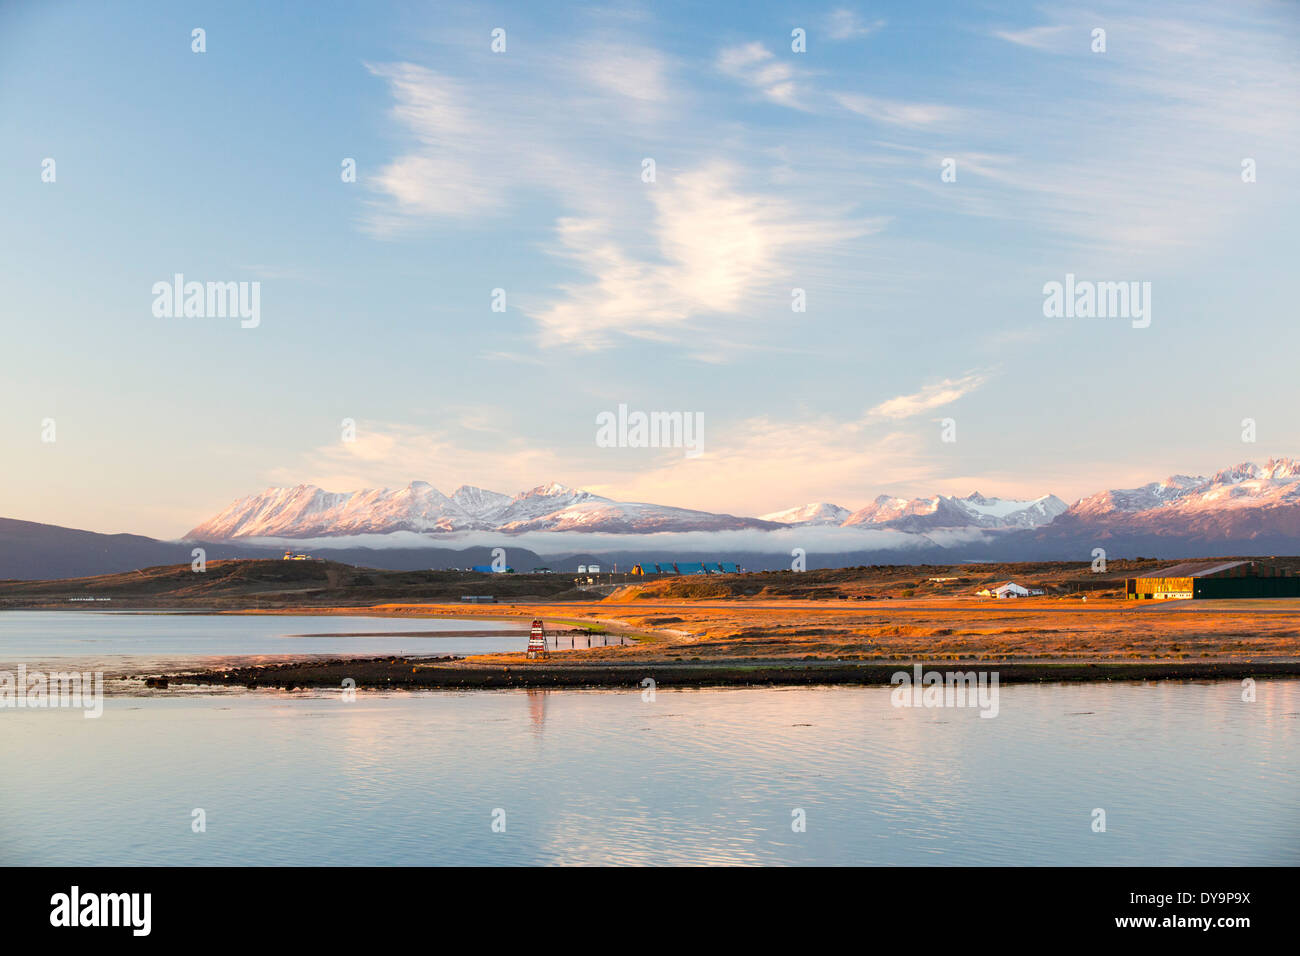 The Martial mountain range in dawn light in the town of Ushuaia which is the capital of Tierra del Fuego, in Argentina, Stock Photo